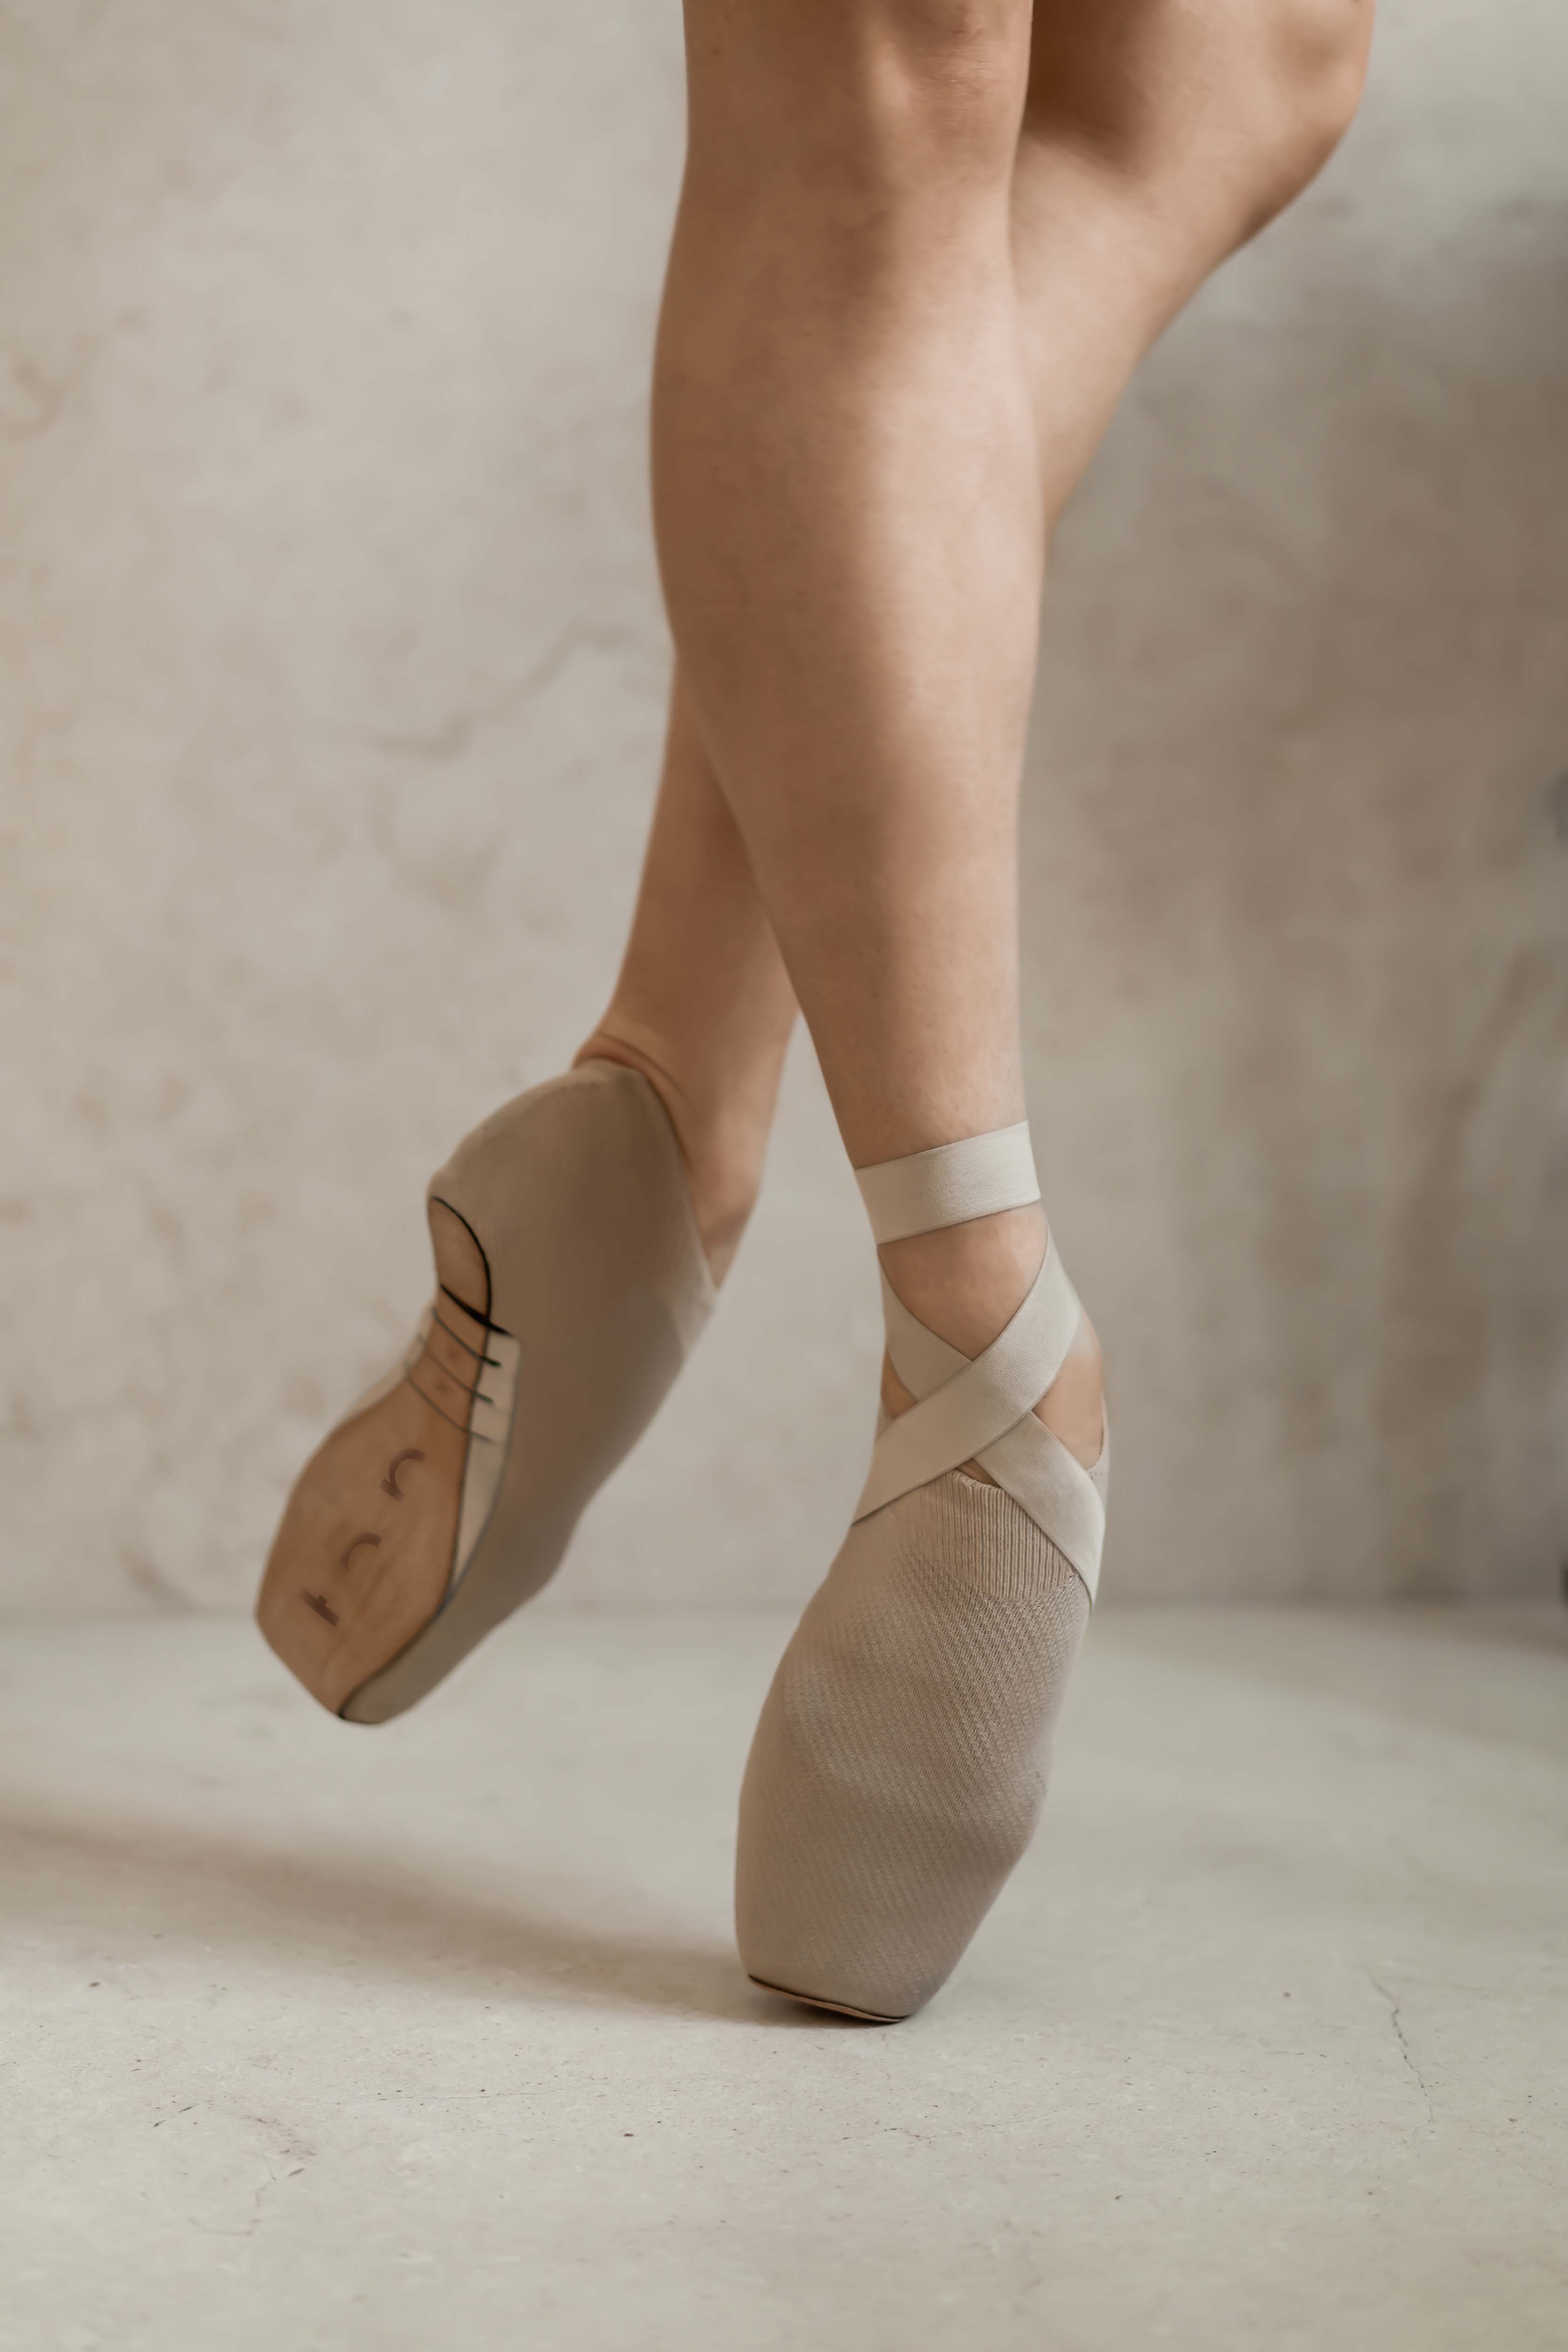 Act'Pointes (Pre-Orders Only)